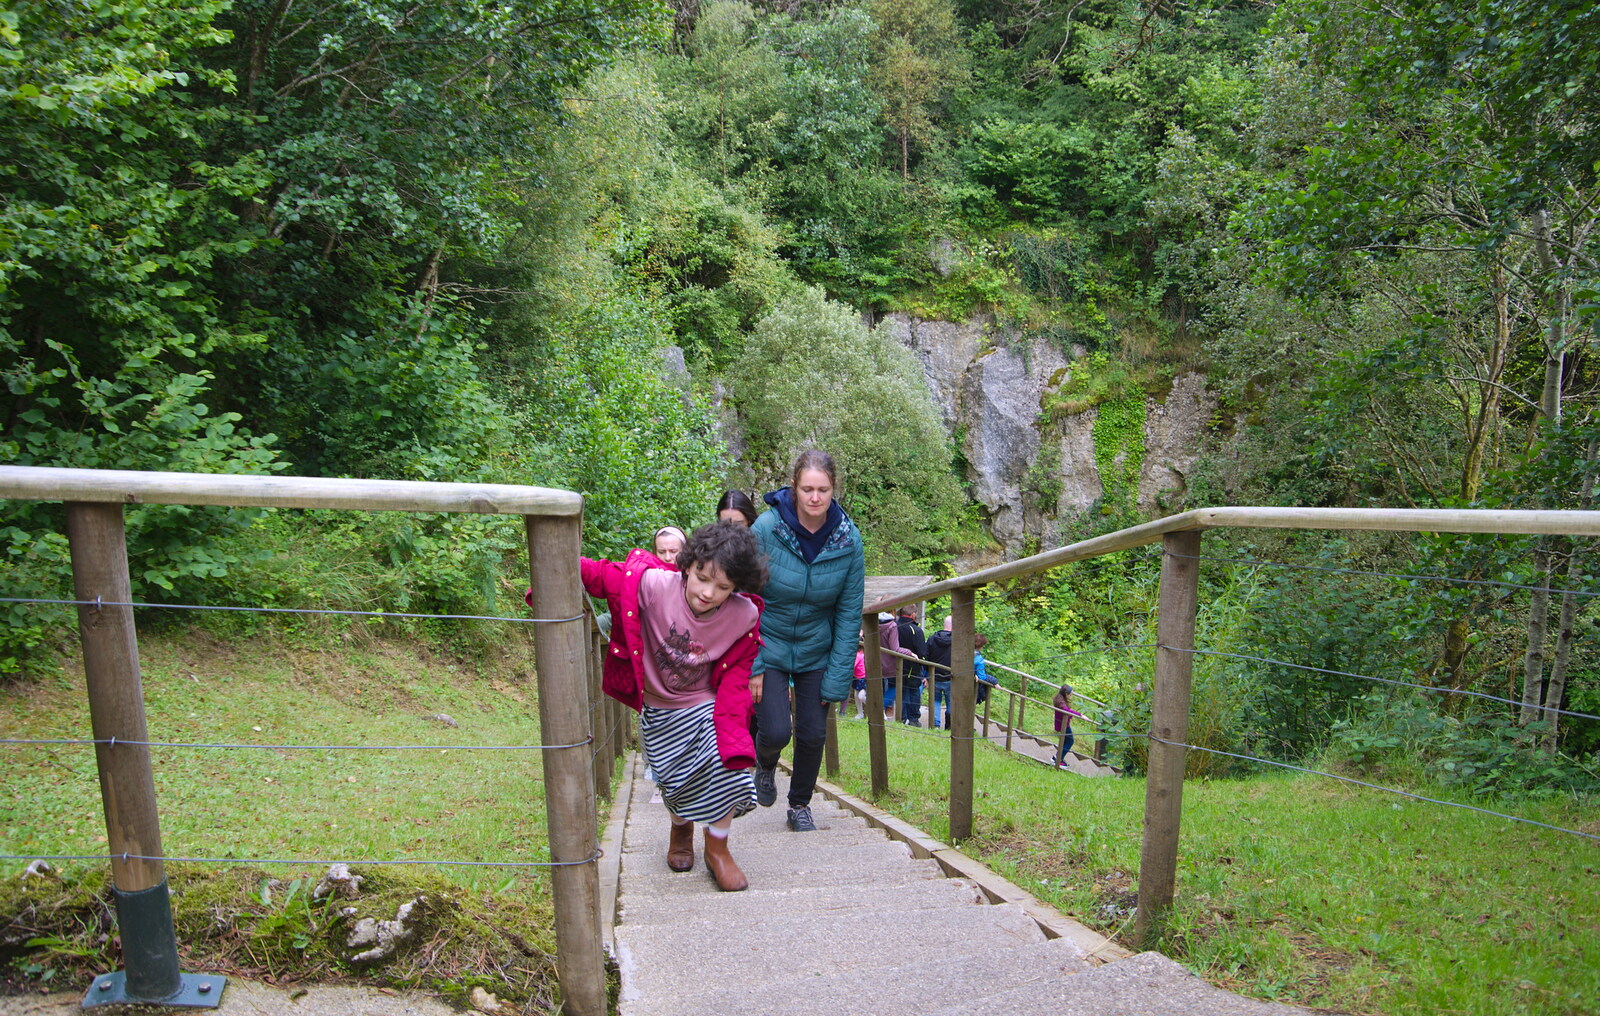 Fern and Isobel climb the steps back out of the pit from Mullaghmore Beach and Marble Arch Caves, Sligo and Fermanagh, Ireland - 19th August 2019